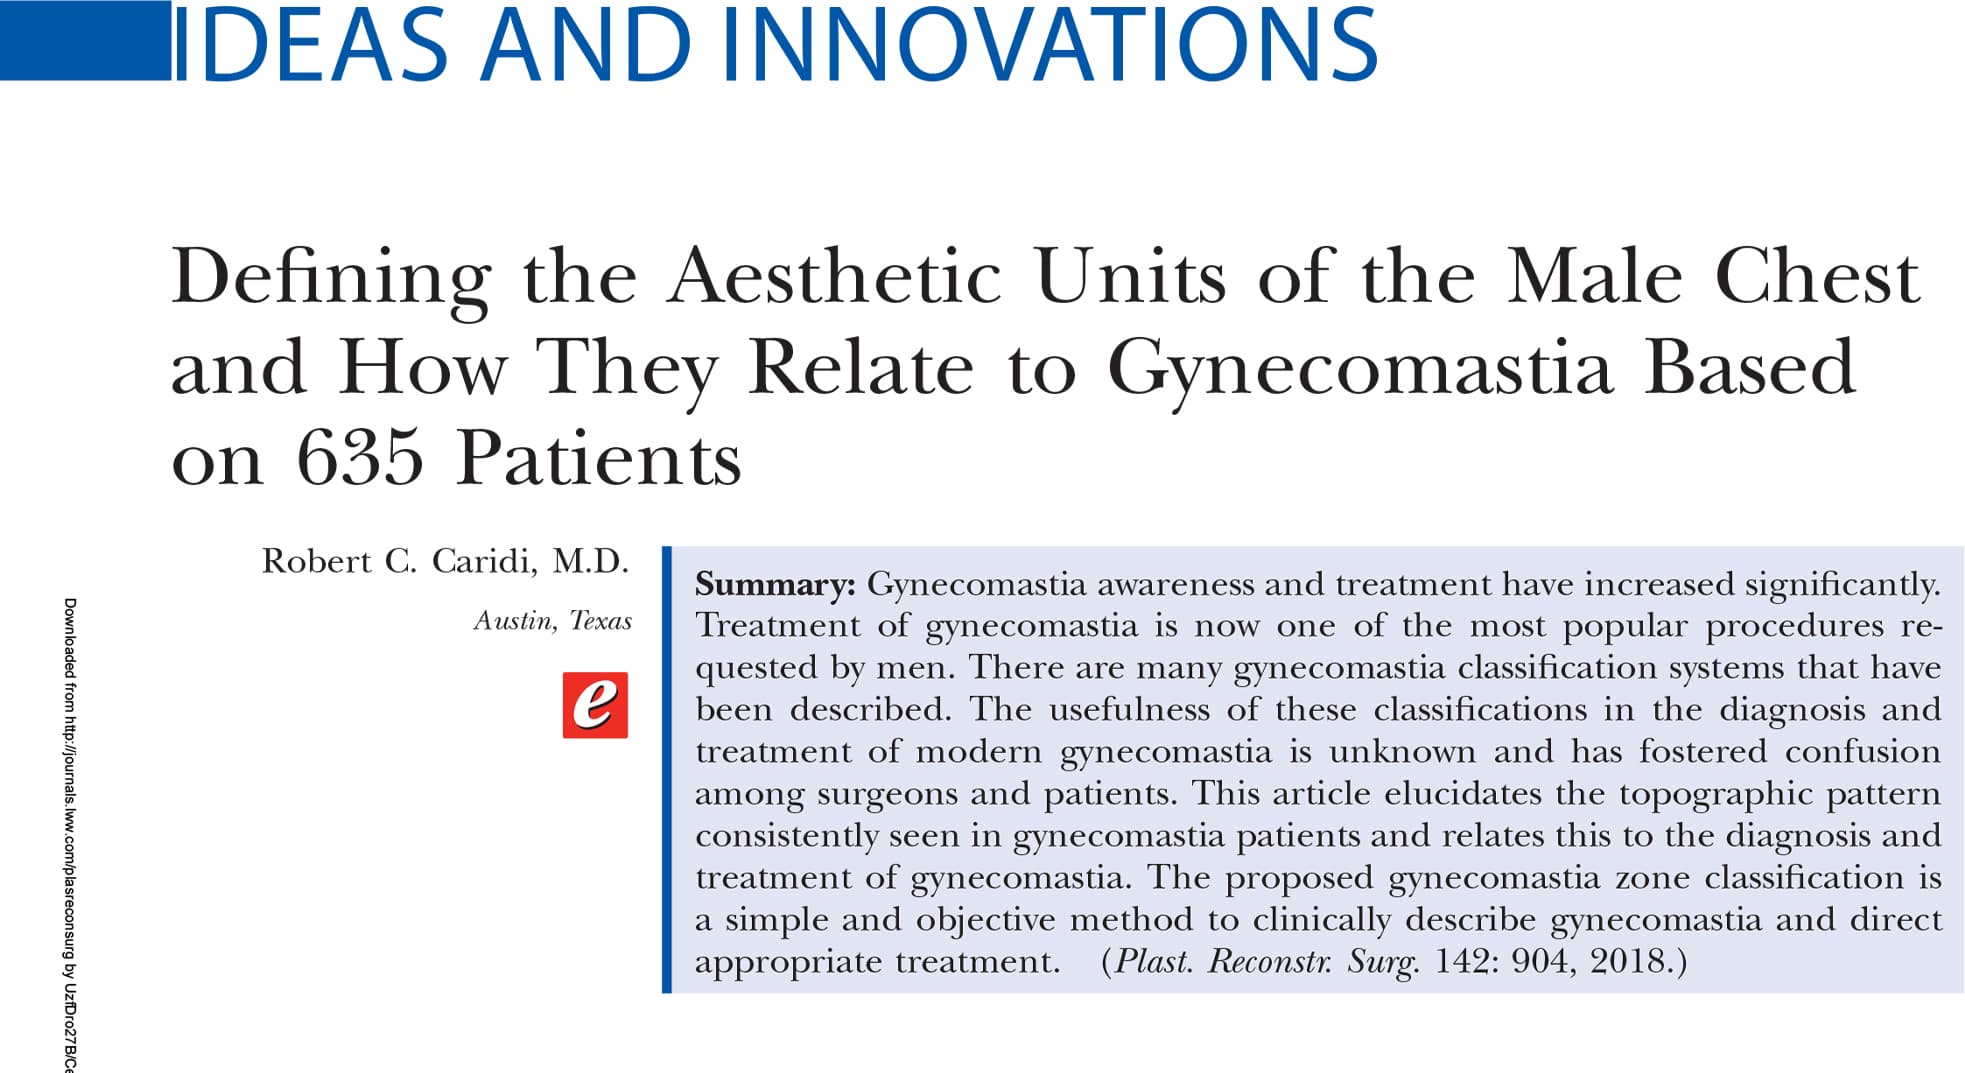 Defining the Aesthetic Units of the Male Chest and How They Relate to Gynecomastia Based on 635 Patients